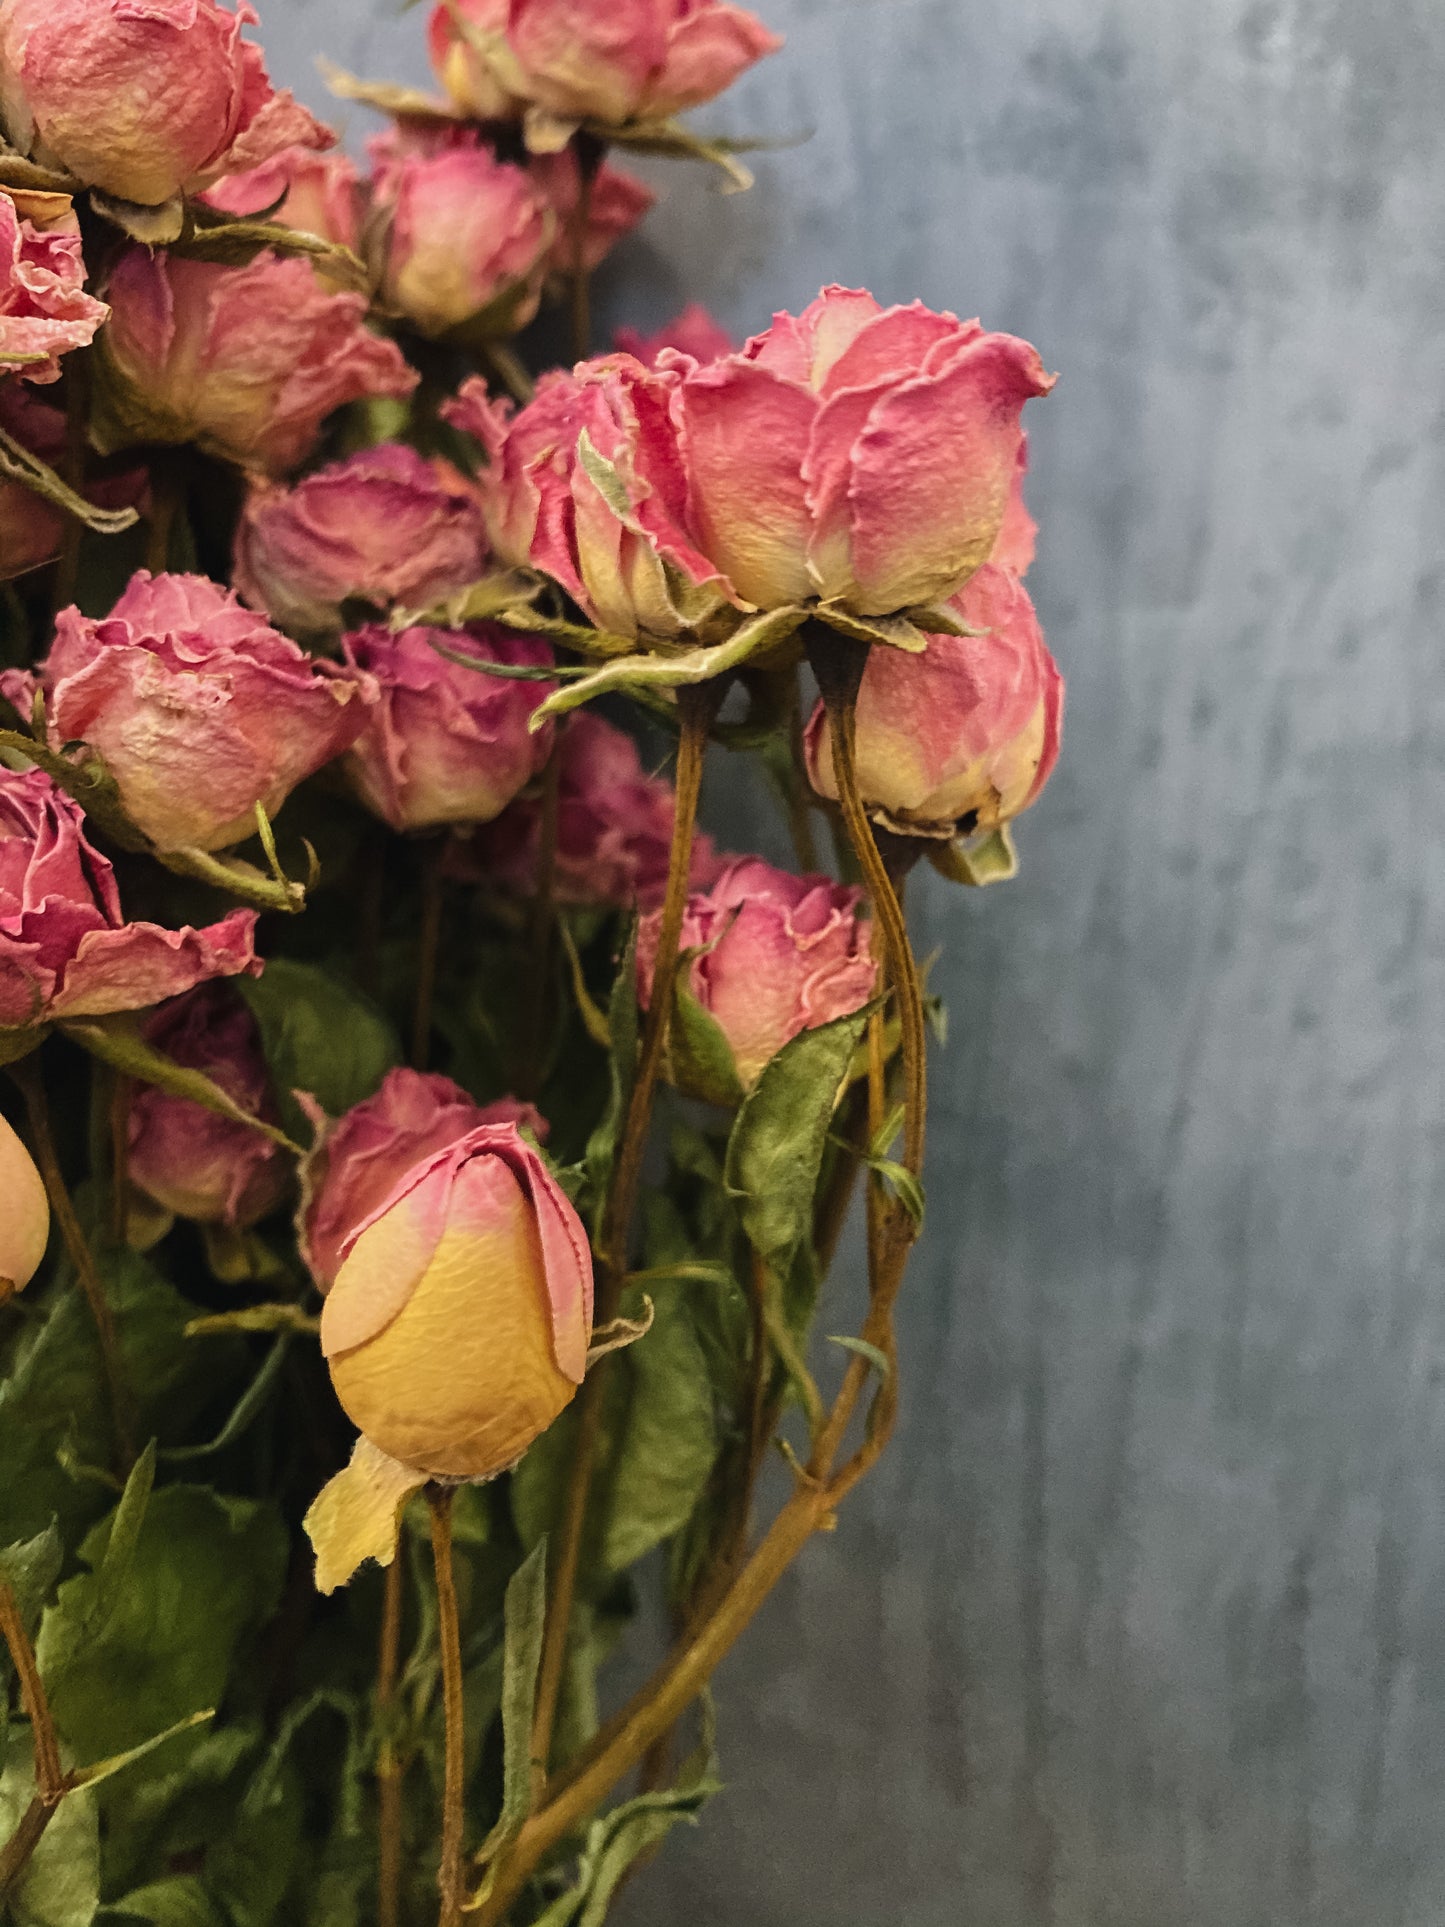 Dried Spray roses - pink